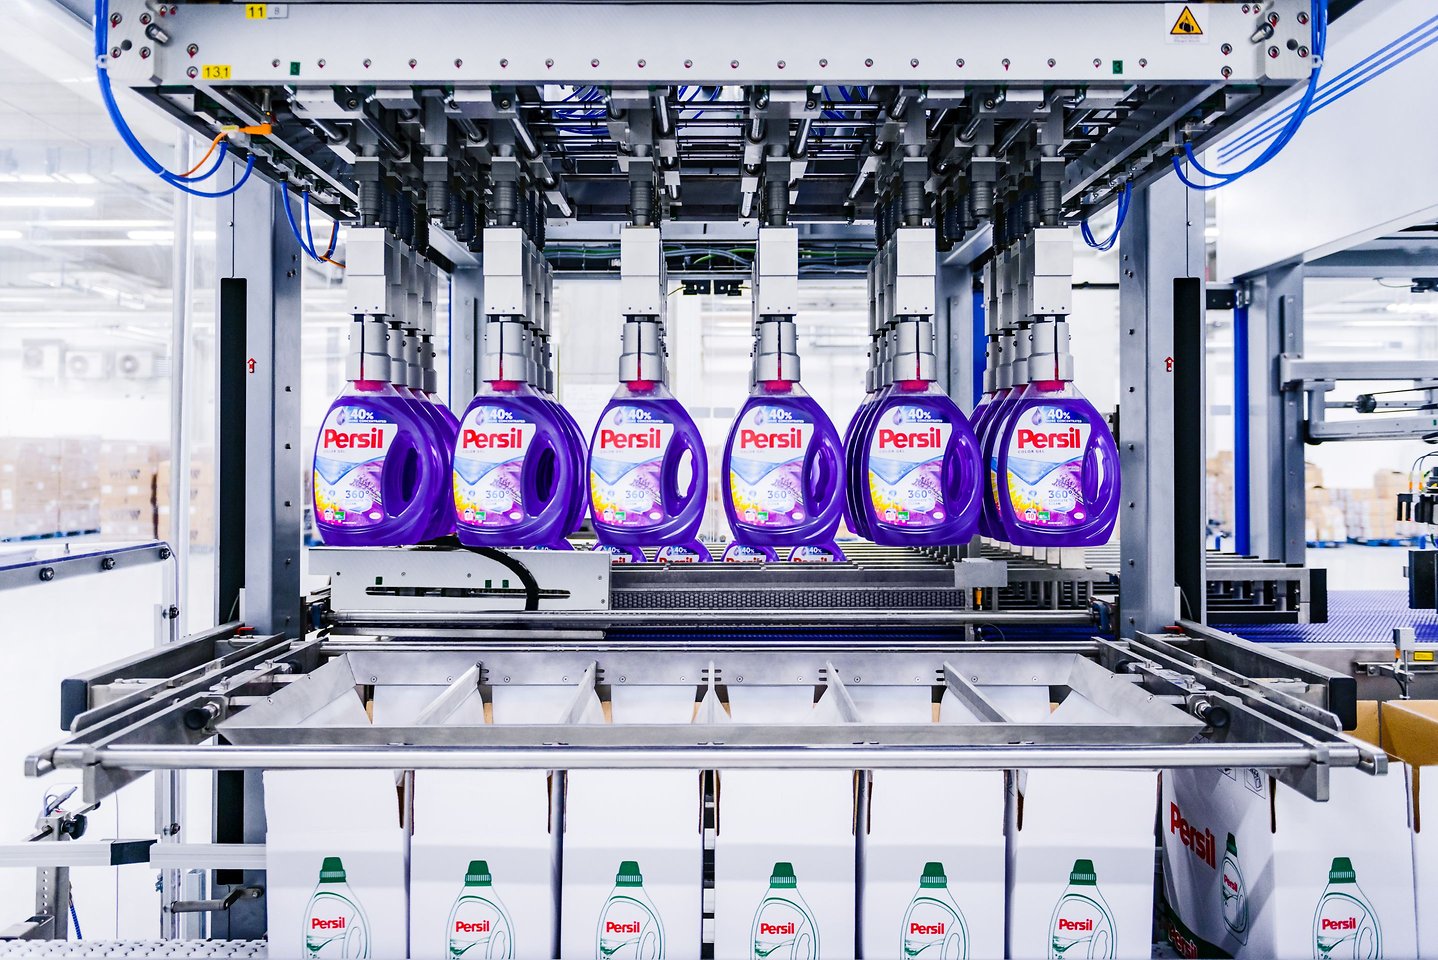 service Care press a EuropaWire.eu production | laundry Henkel | Home in & distribution Racibórz, The production invests European new, in Henkel\'s & Union\'s line site state-of-the-art release Poland Laundry at newswire